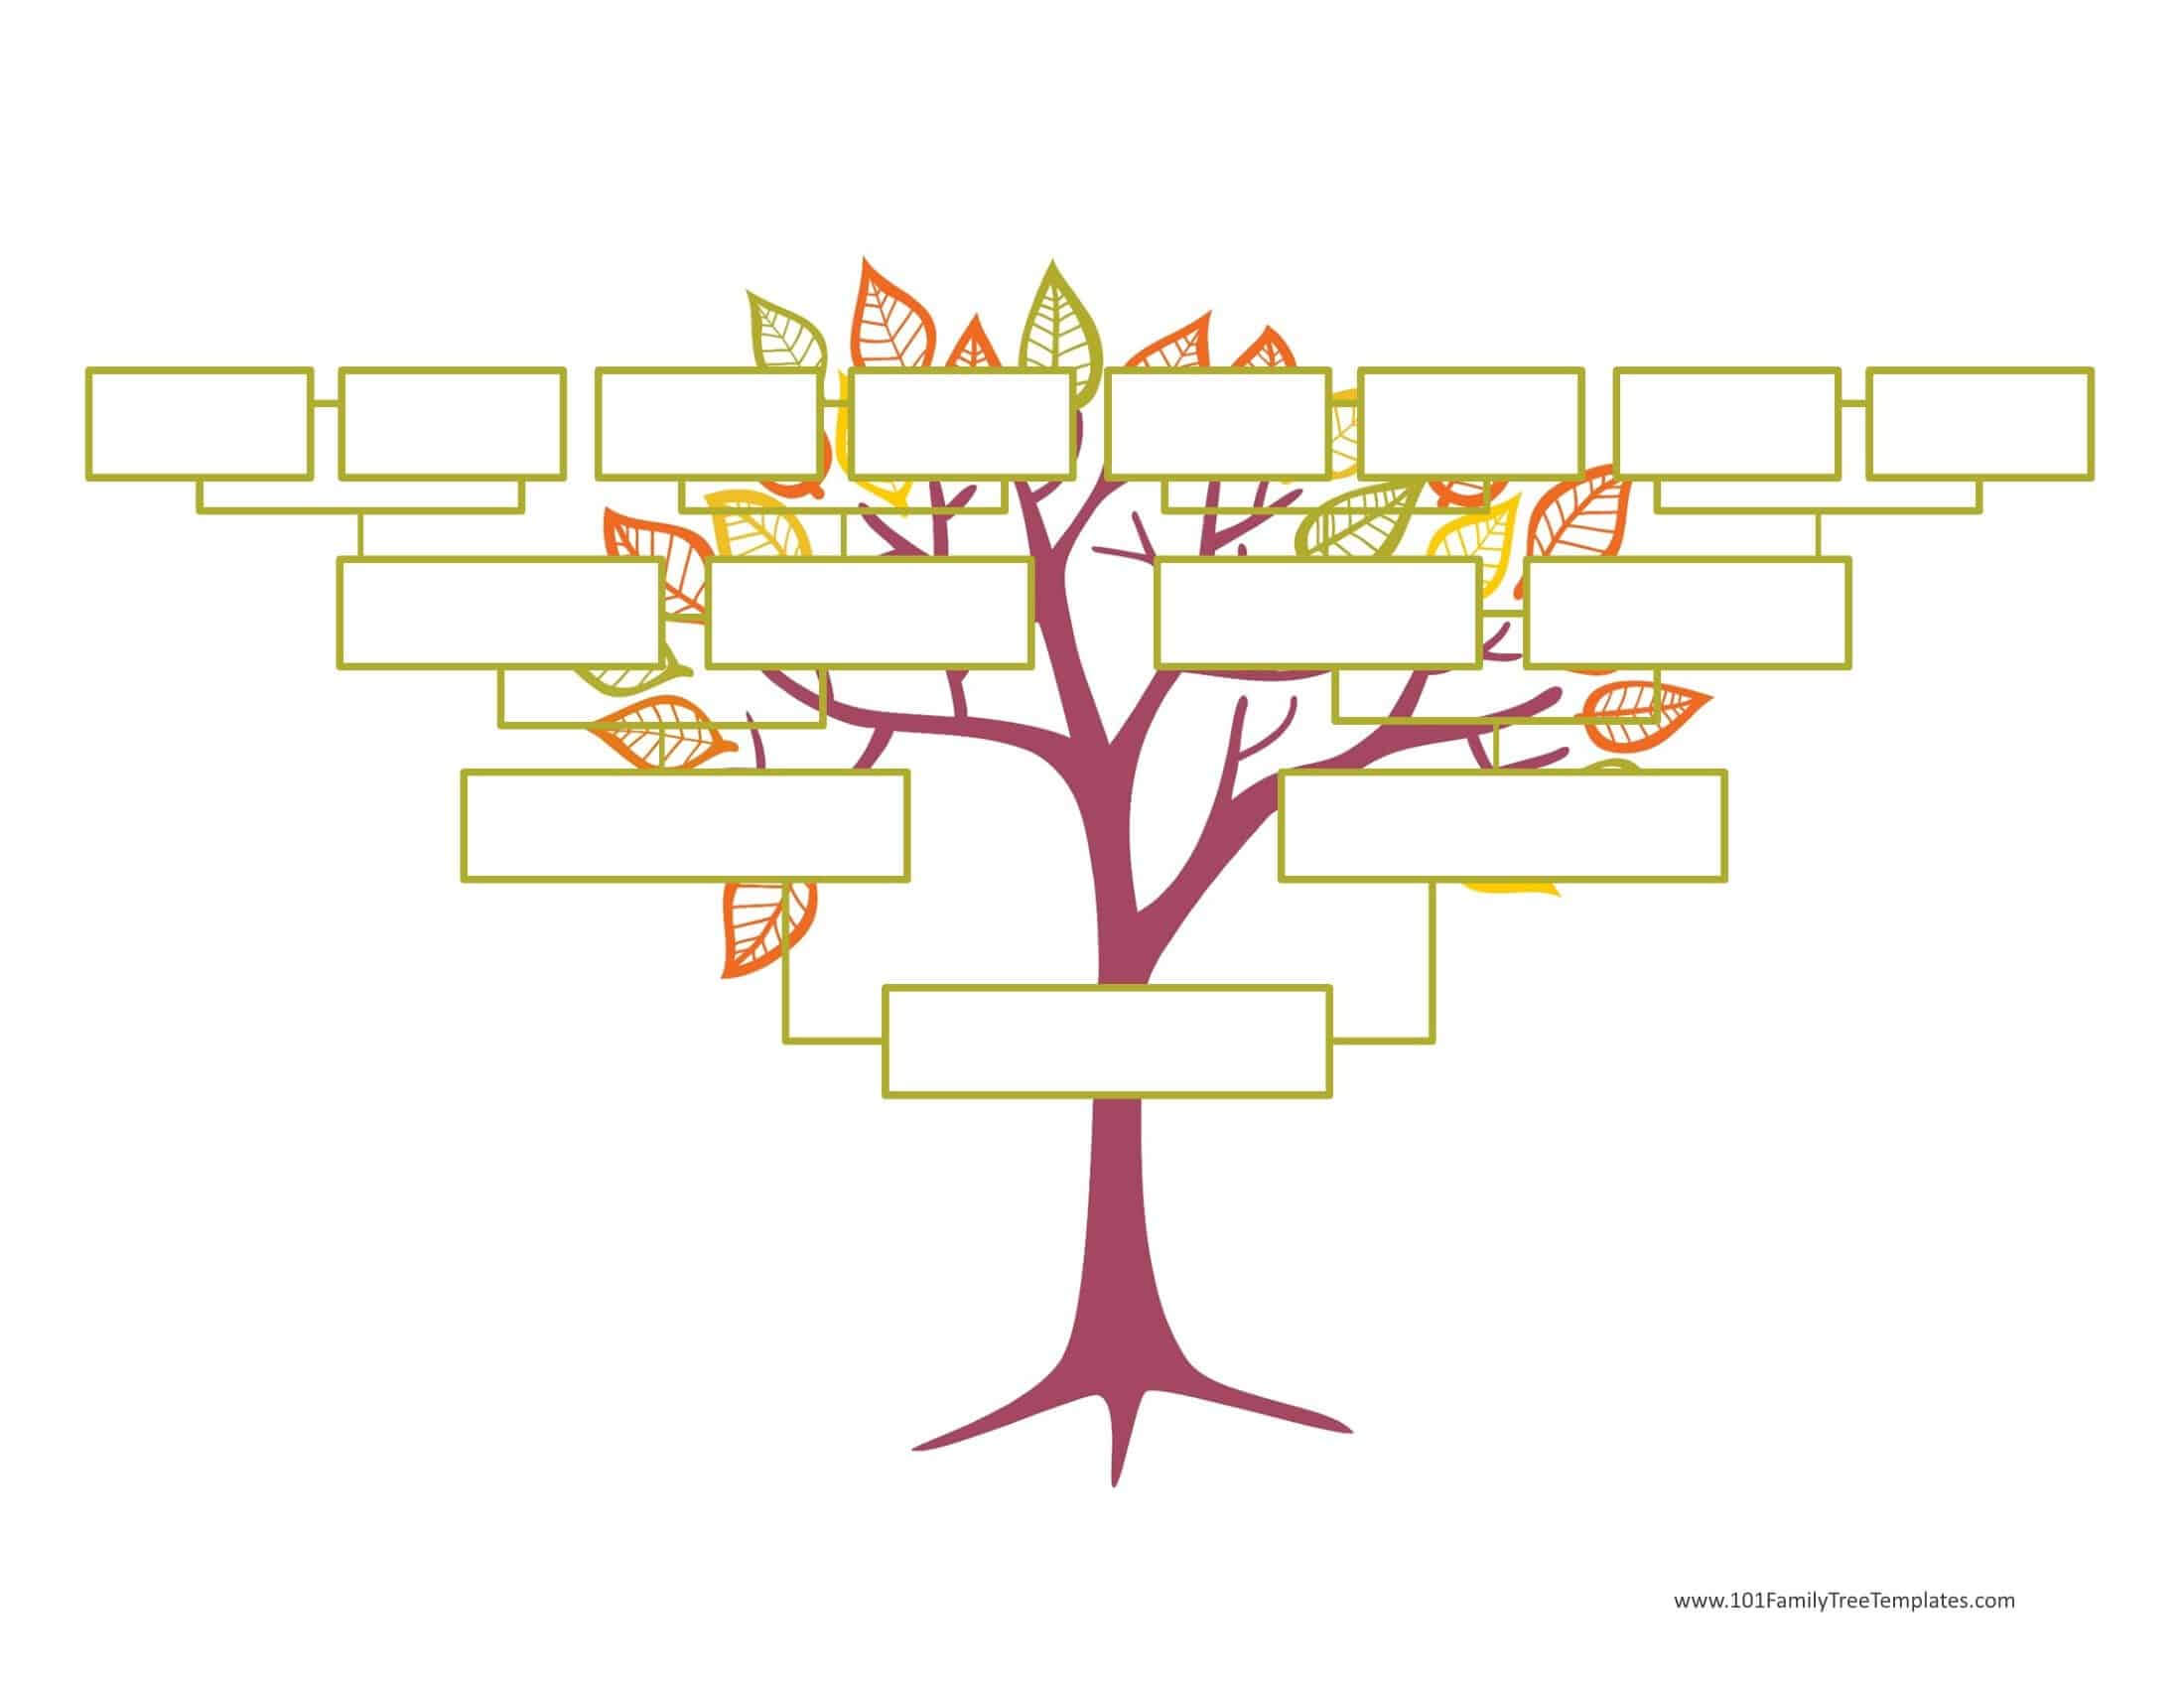 Blank Family Tree Template | Free Instant Download With Regard To Blank Tree Diagram Template